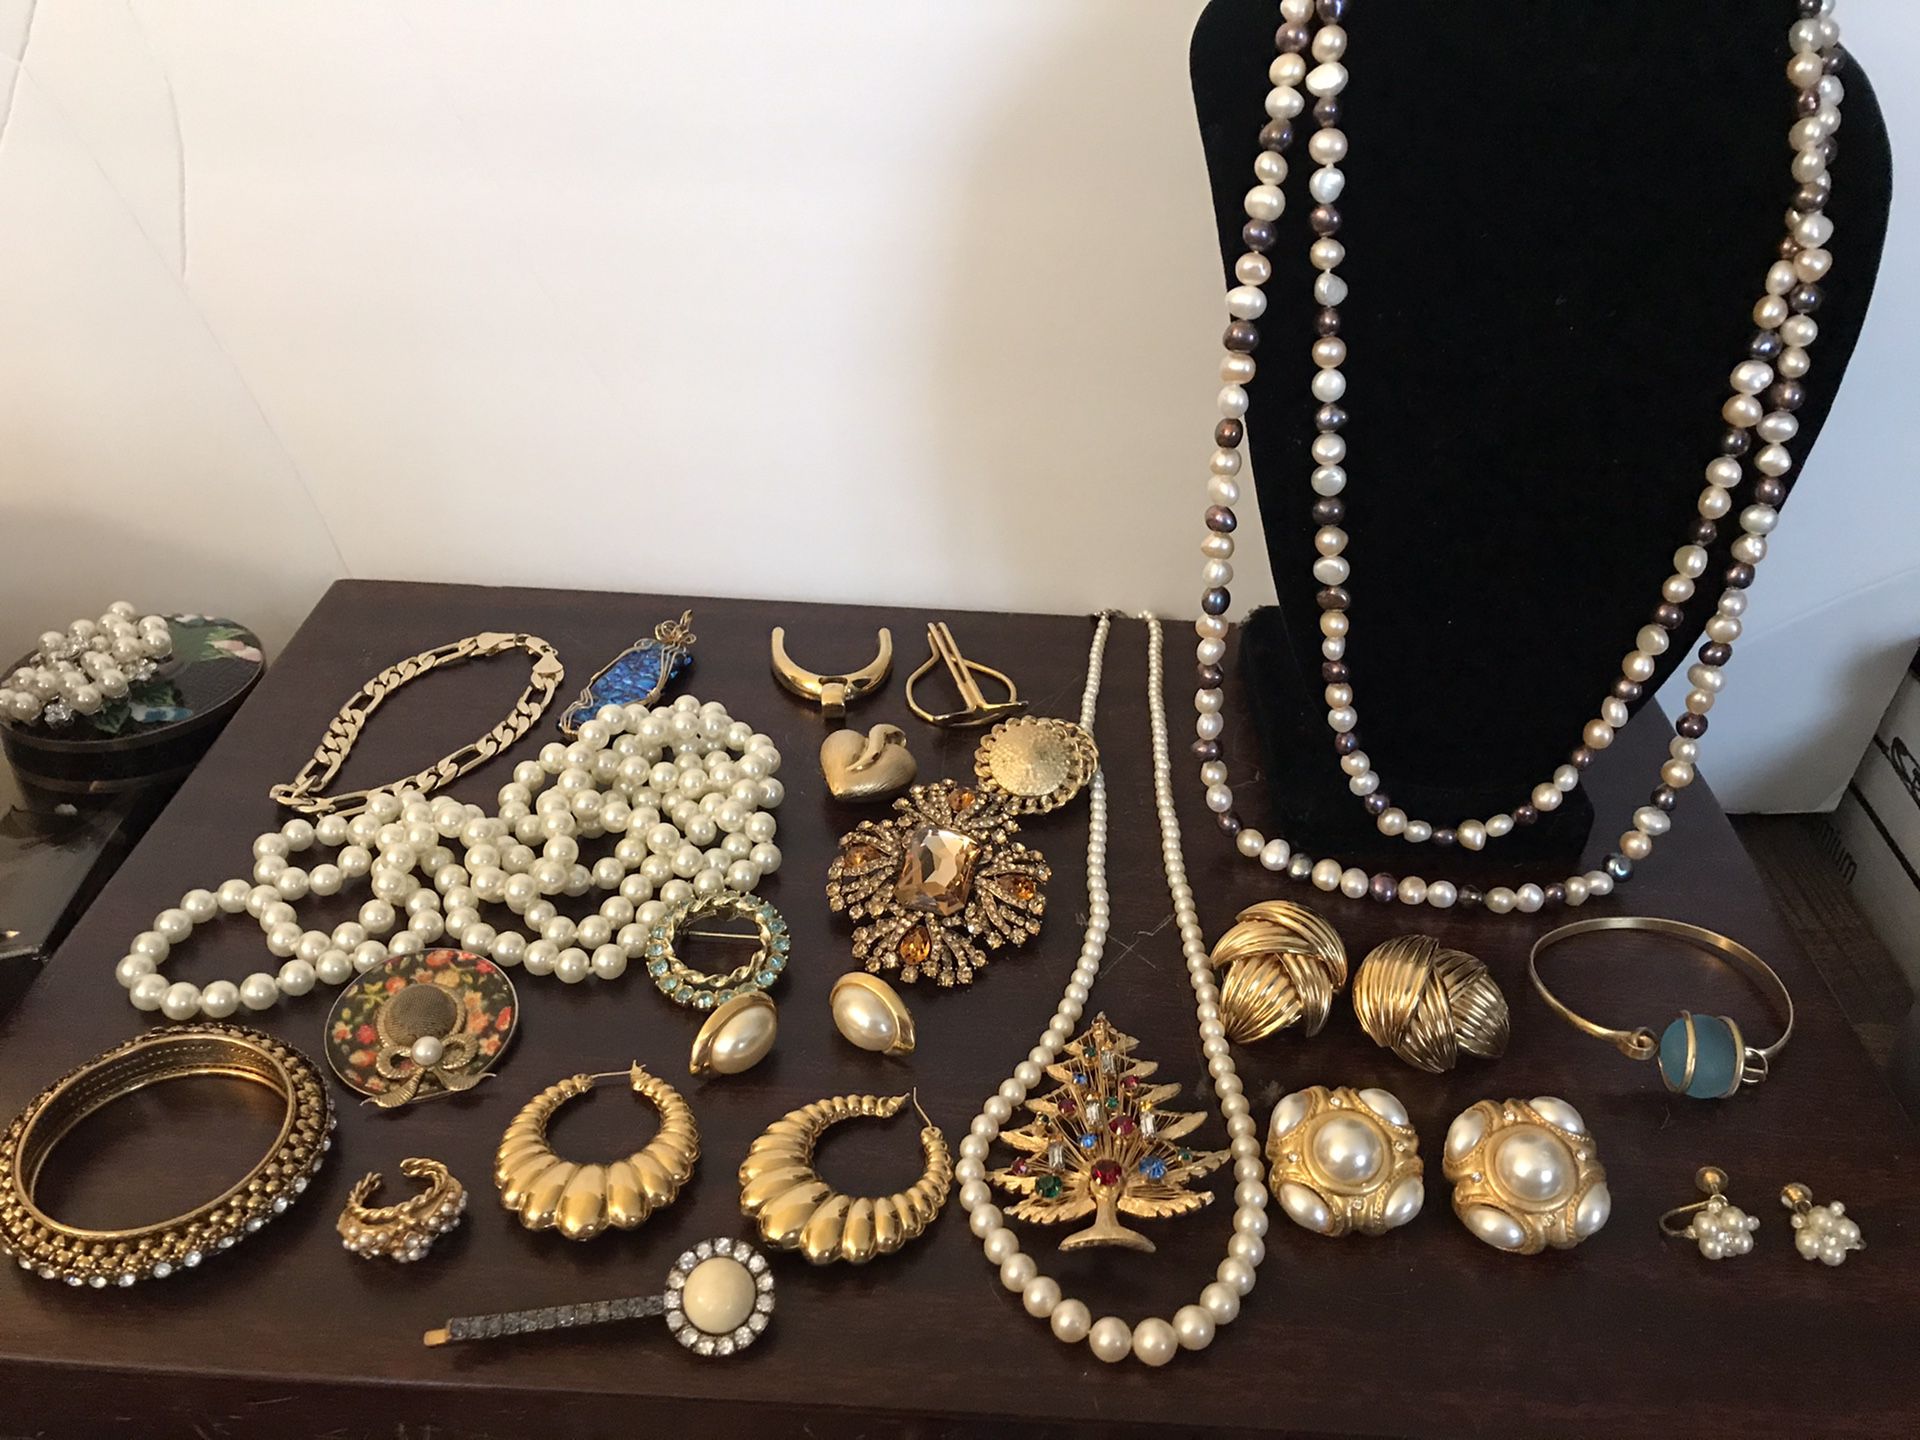 Large rhinestone gold tone pin $25, pearl earrings $10 each, goldtone chain bracelet $15 all the rest is on next ad